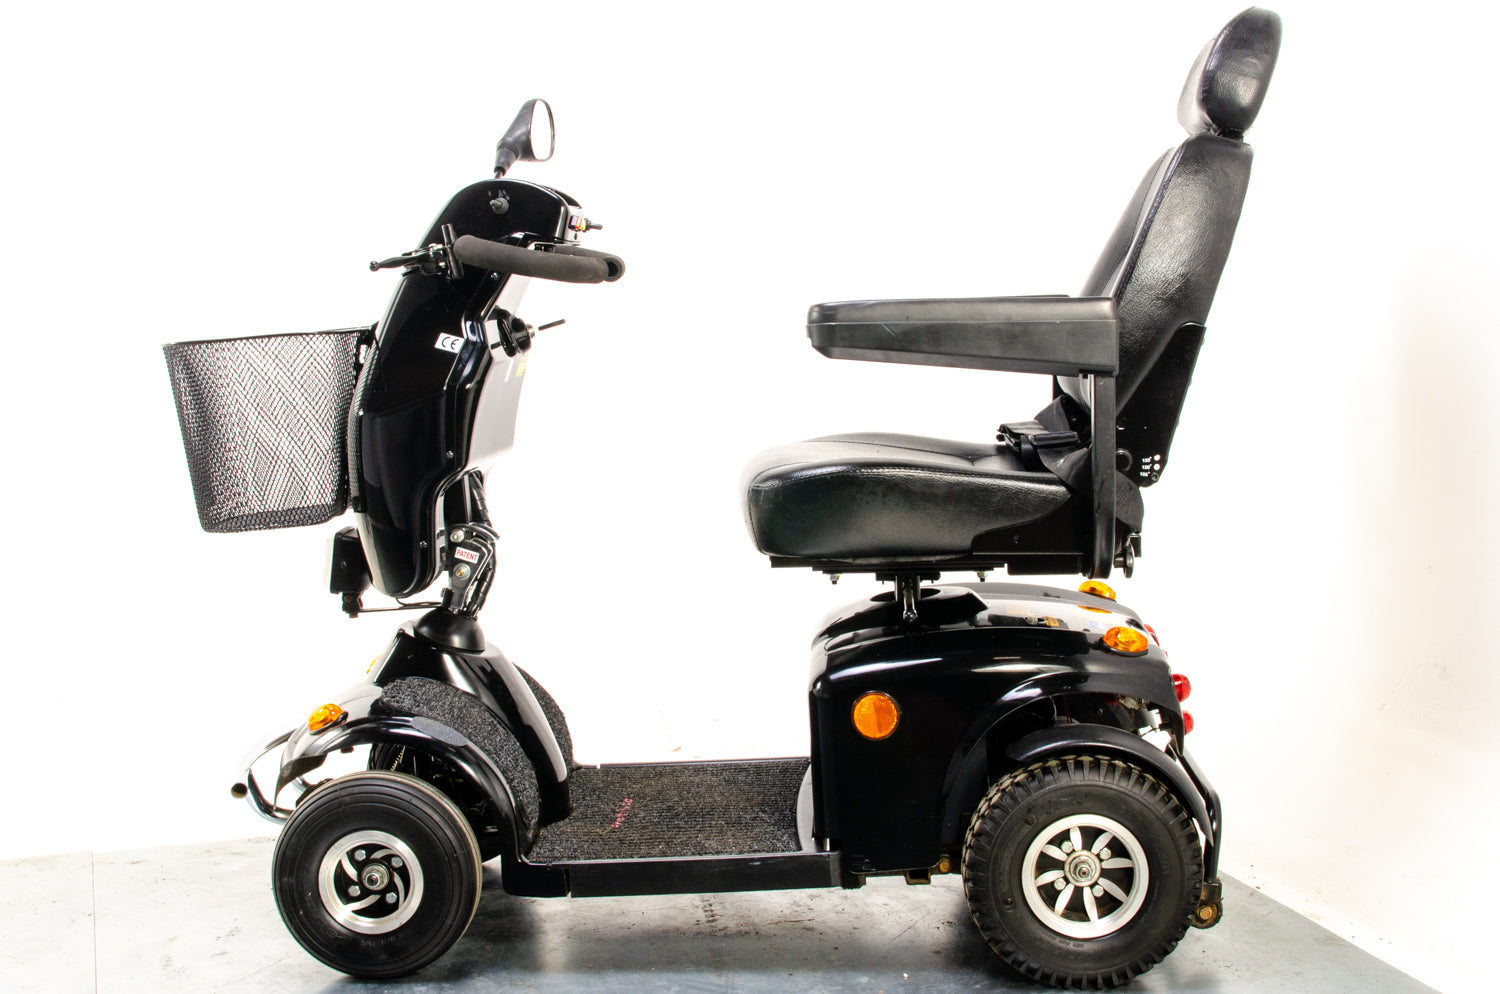 Freerider Mayfair 8 Deluxe Used Mobility Scooter 8mph Class 3 Black Suspension Pneumatic Road Pavement